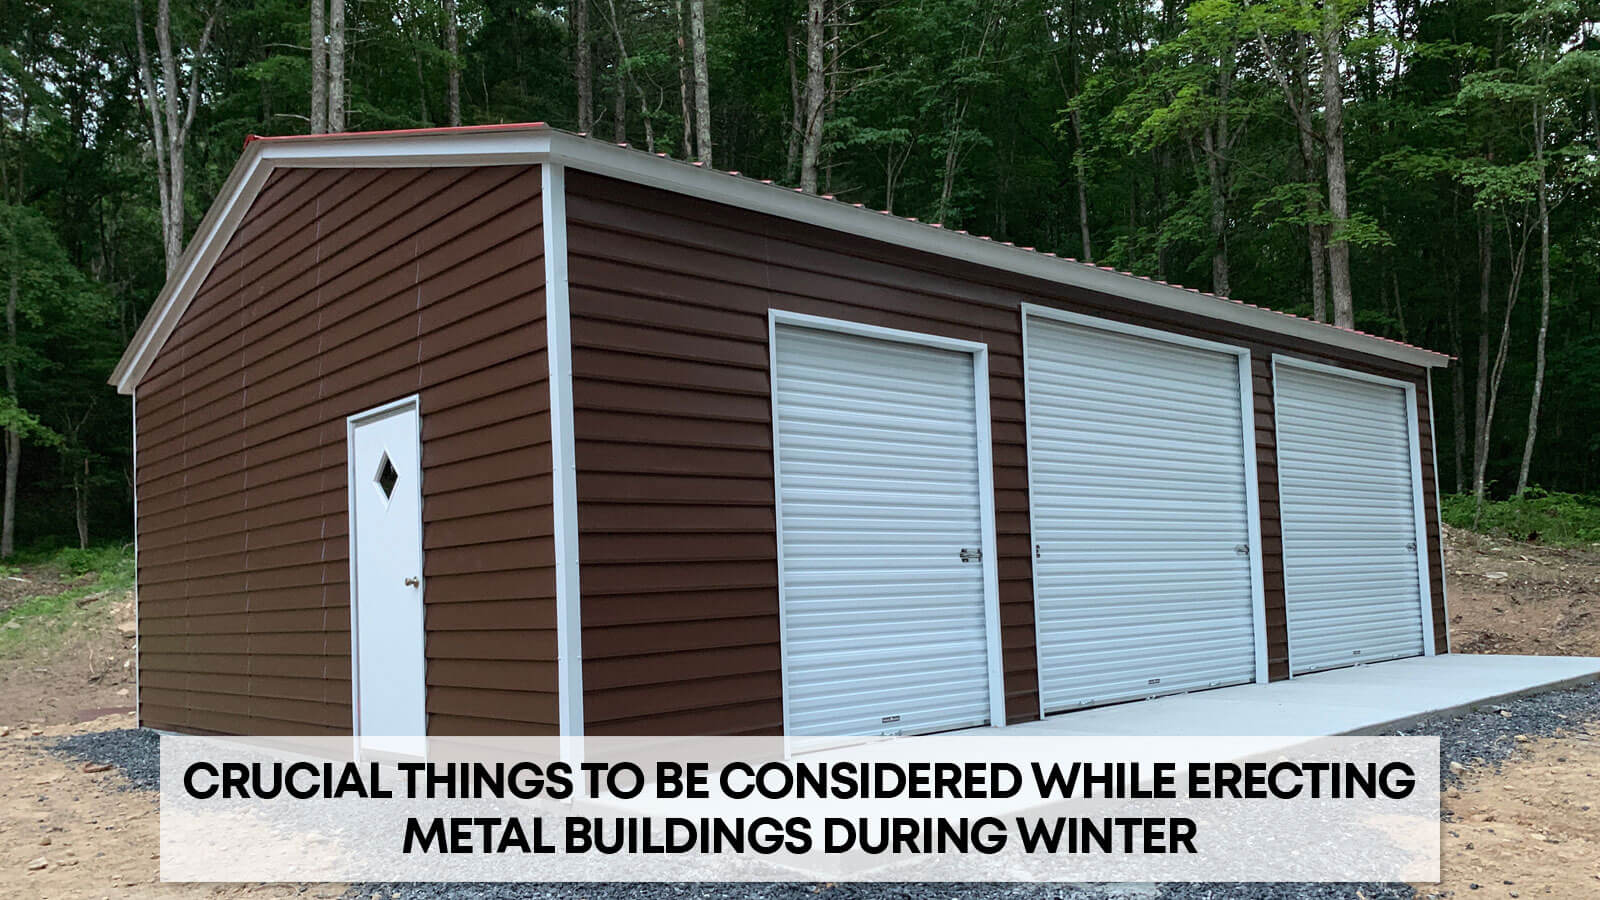 Crucial Things to be Considered While Erecting Metal Buildings